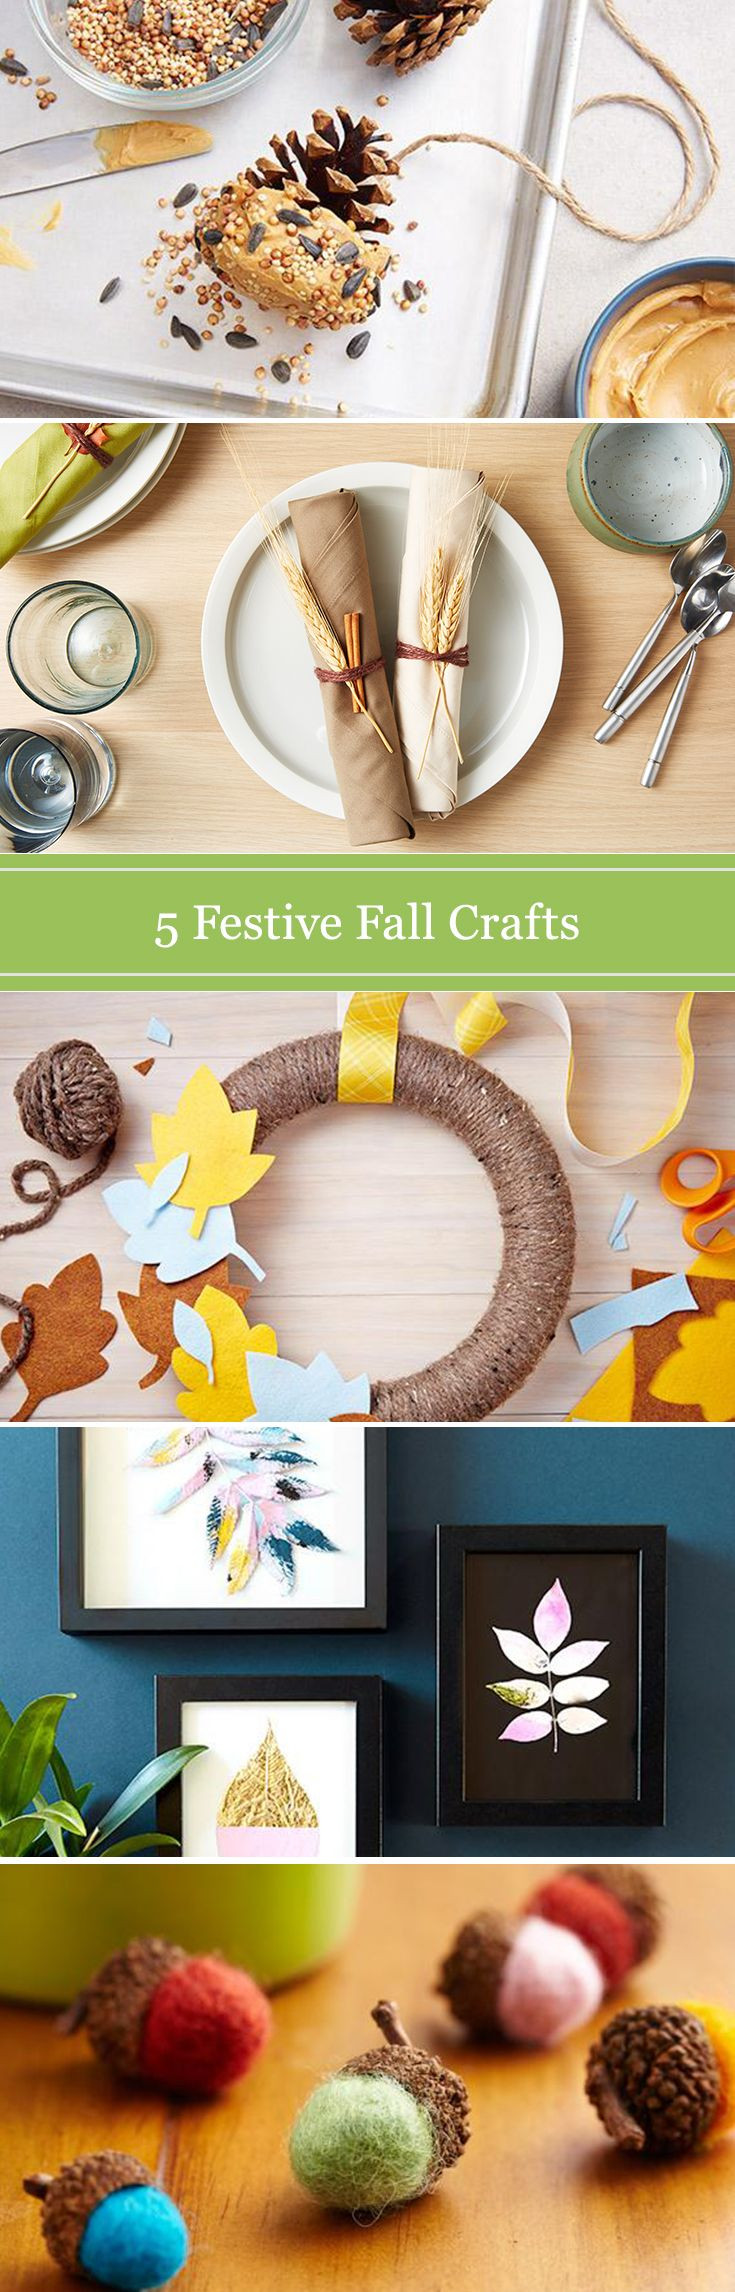 Crafting Ideas For Adults
 51 best Craft Ideas for Adults images on Pinterest